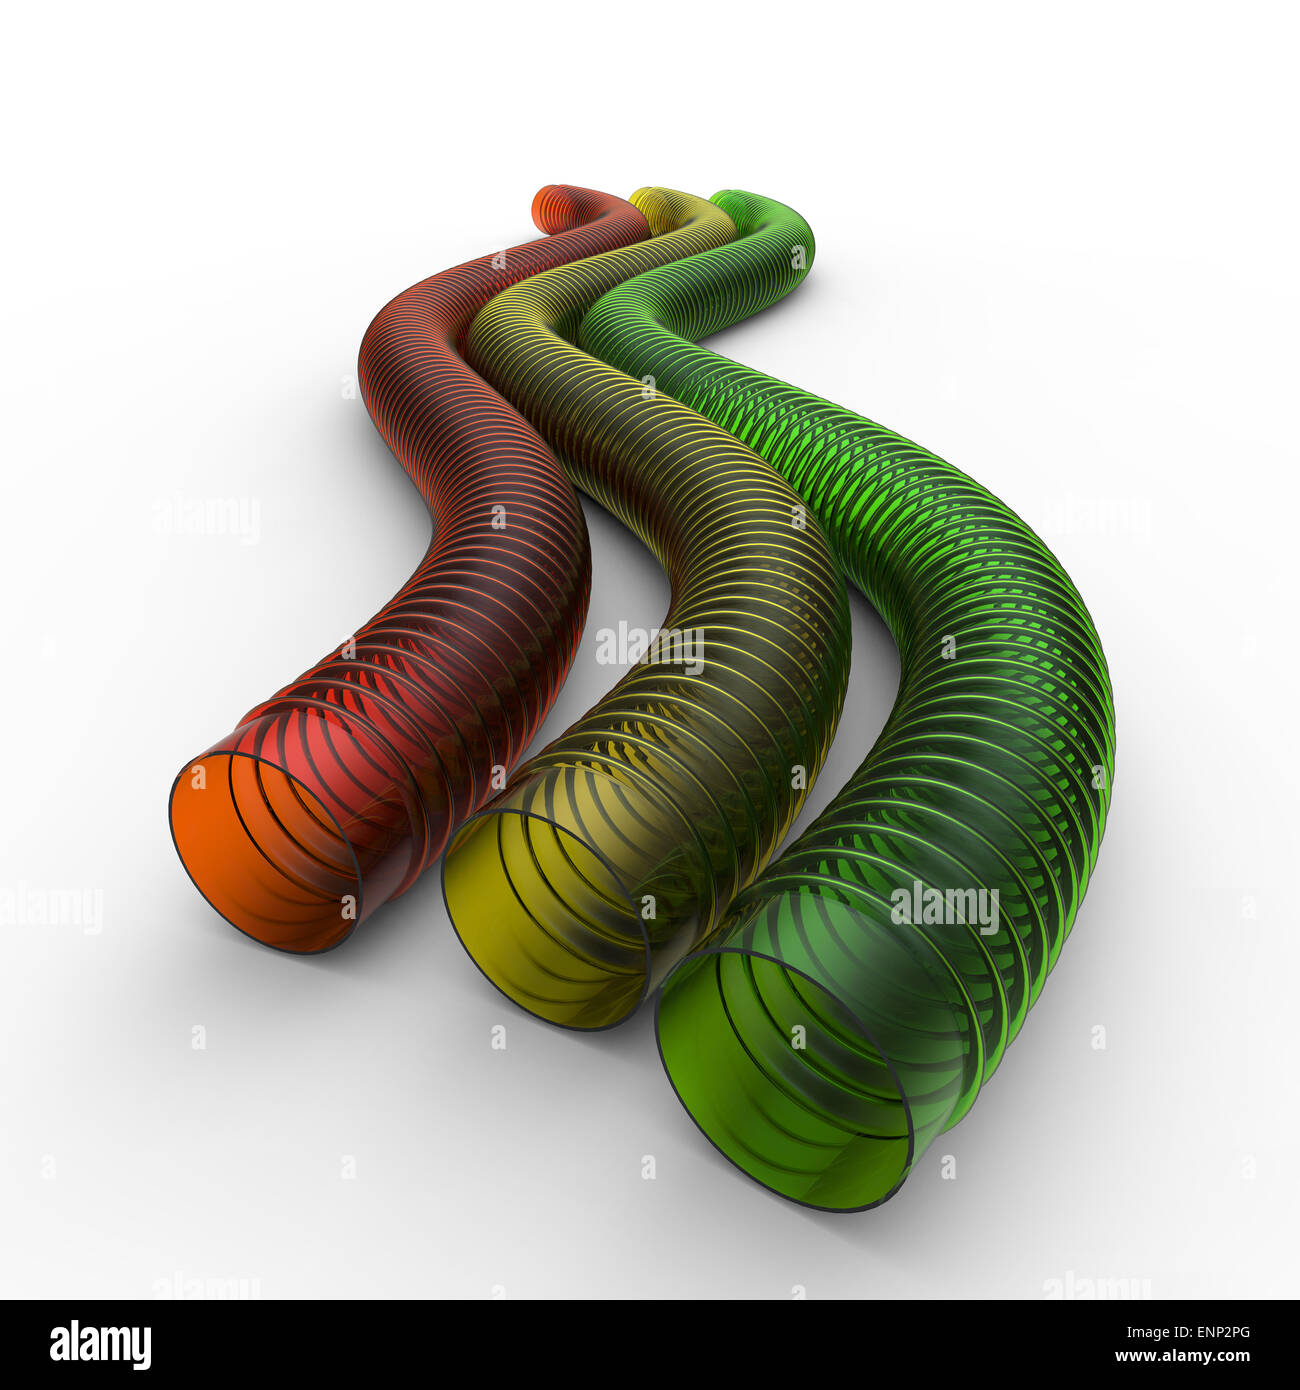 orange yellow and green transparent flexible corrugated plastic rubber hoses on a white background Stock Photo